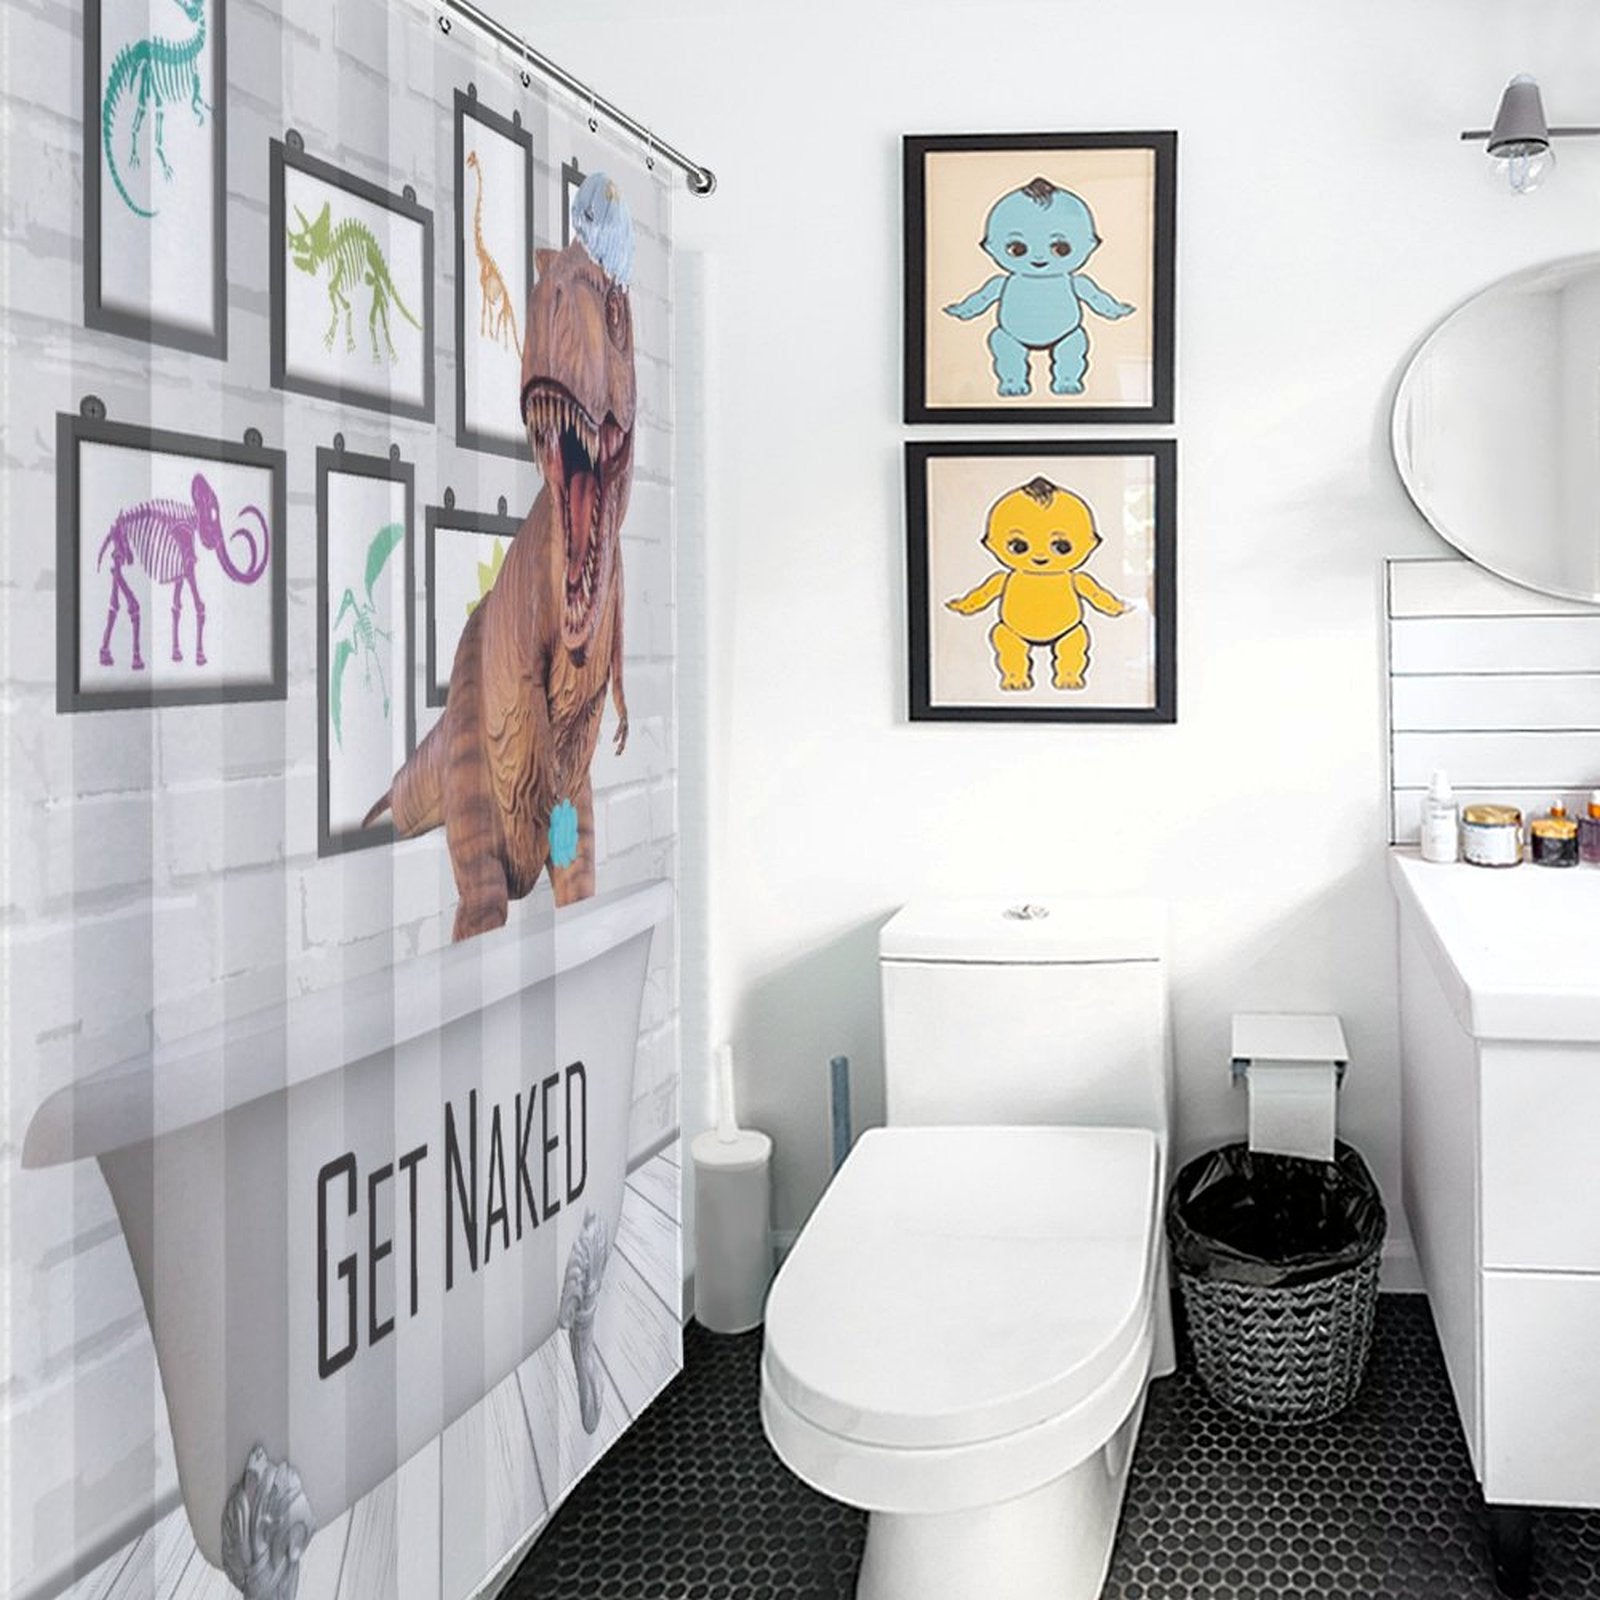 A bathroom with a Funny Dinosaur Get Naked Shower Curtain-Cottoncat by Cotton Cat, wall art of colorful cartoon characters, toilet, sink, and mirror. This playful bathroom decor ensures a whimsical atmosphere for both kids and adults alike.